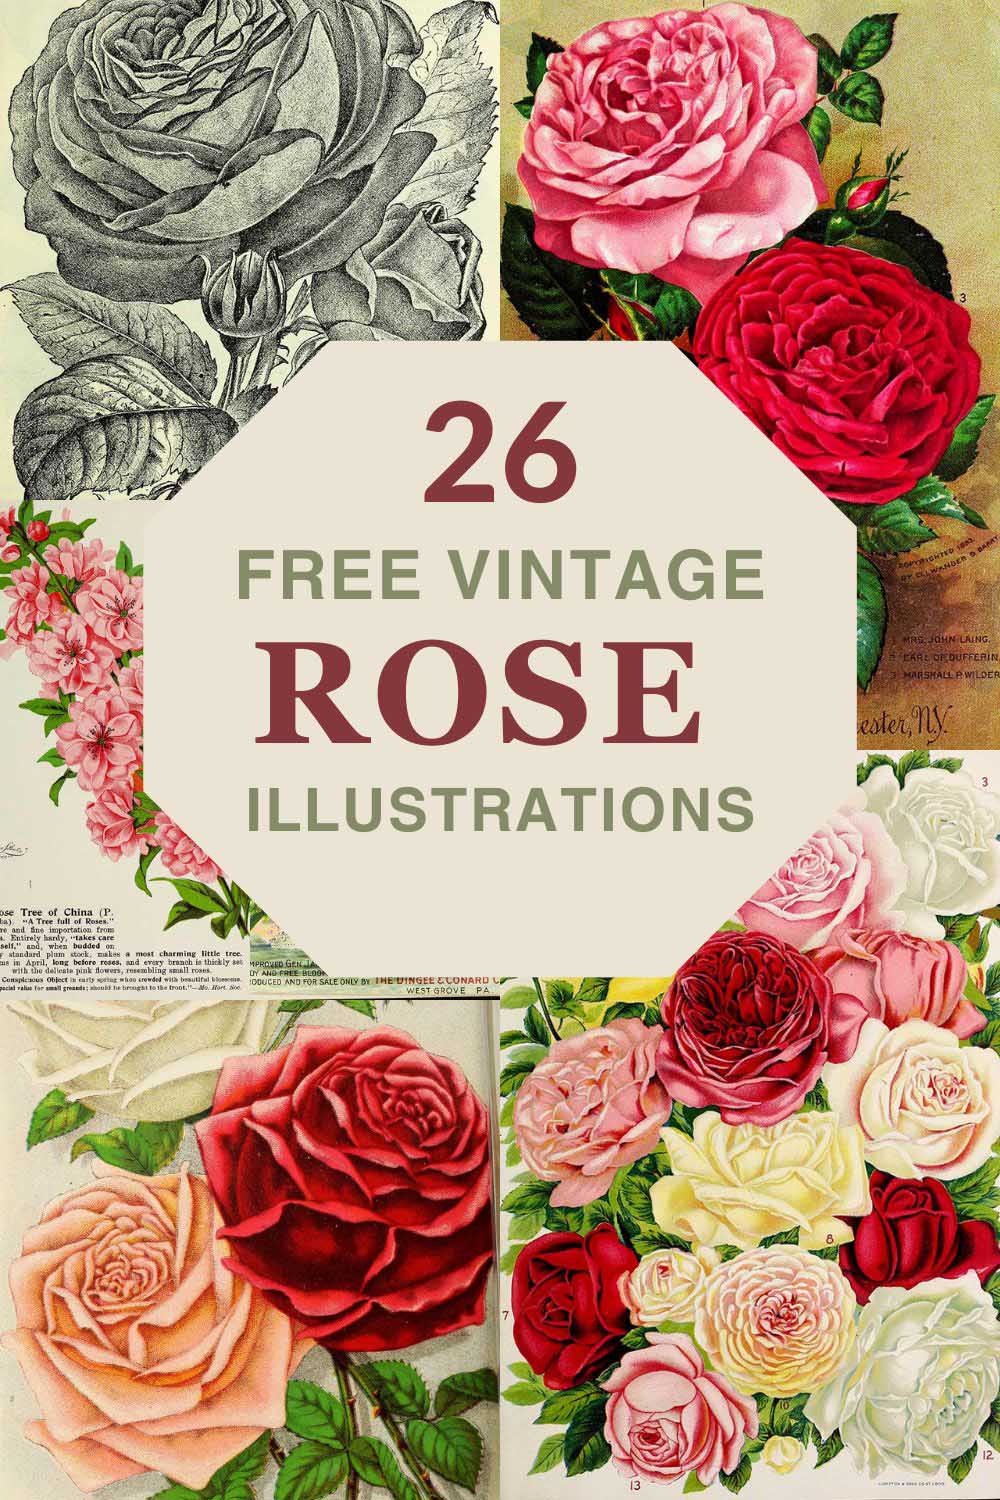 Vintage rose illustrations from catalog covers pin